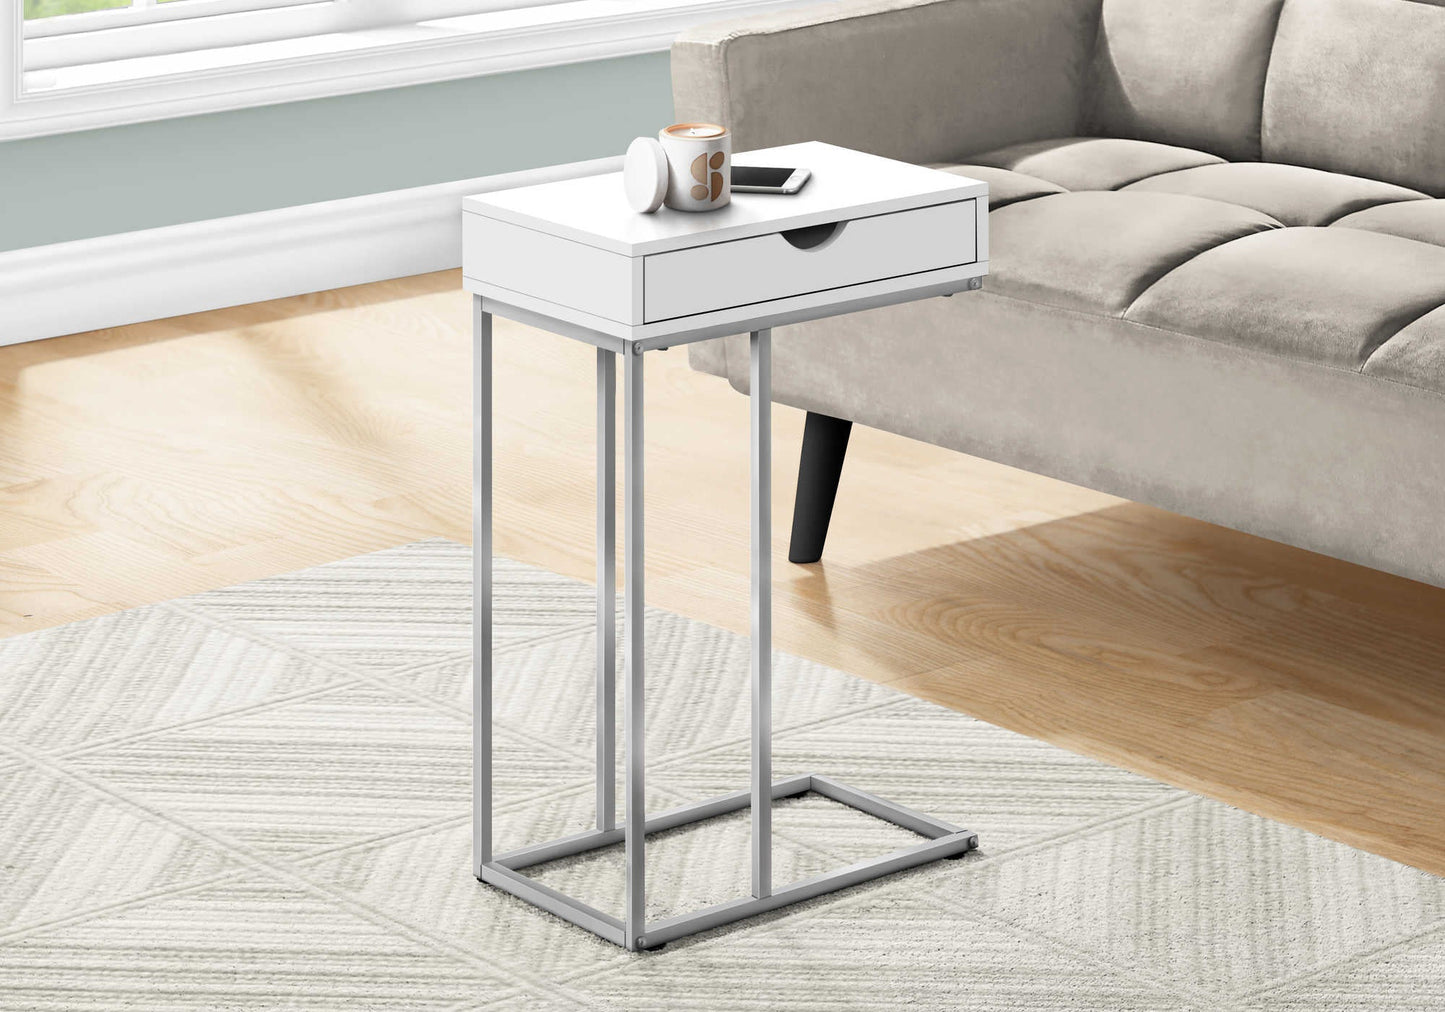 16"L/24"H Modern Laminate Bedroom Accent Table with Metal Frame